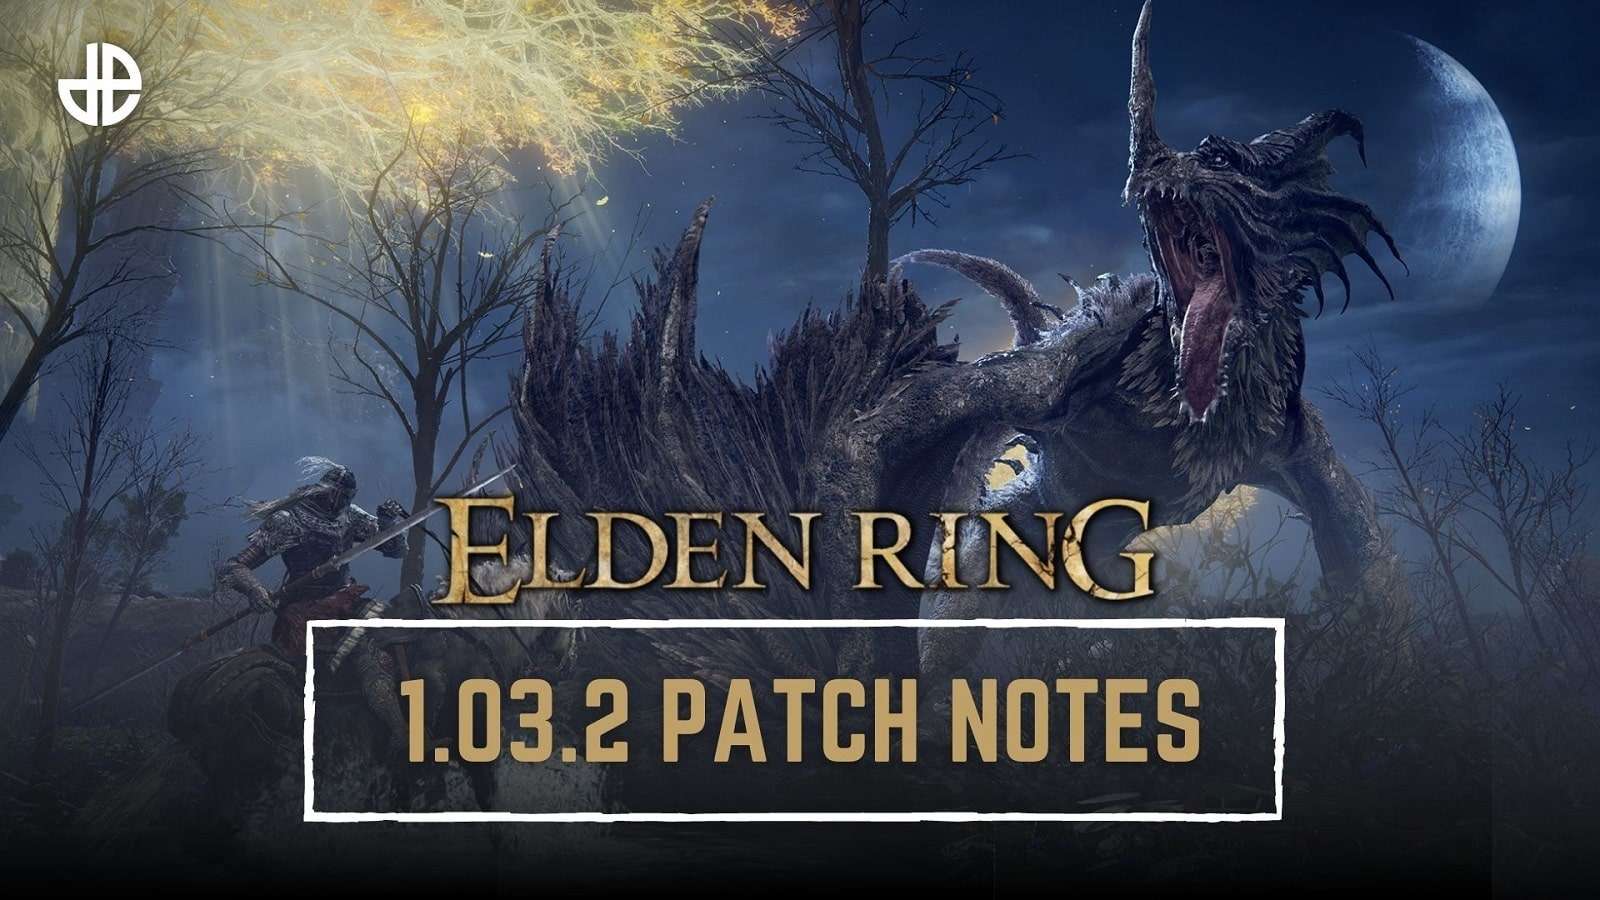 Elden Ring 1.03.2 patch notes